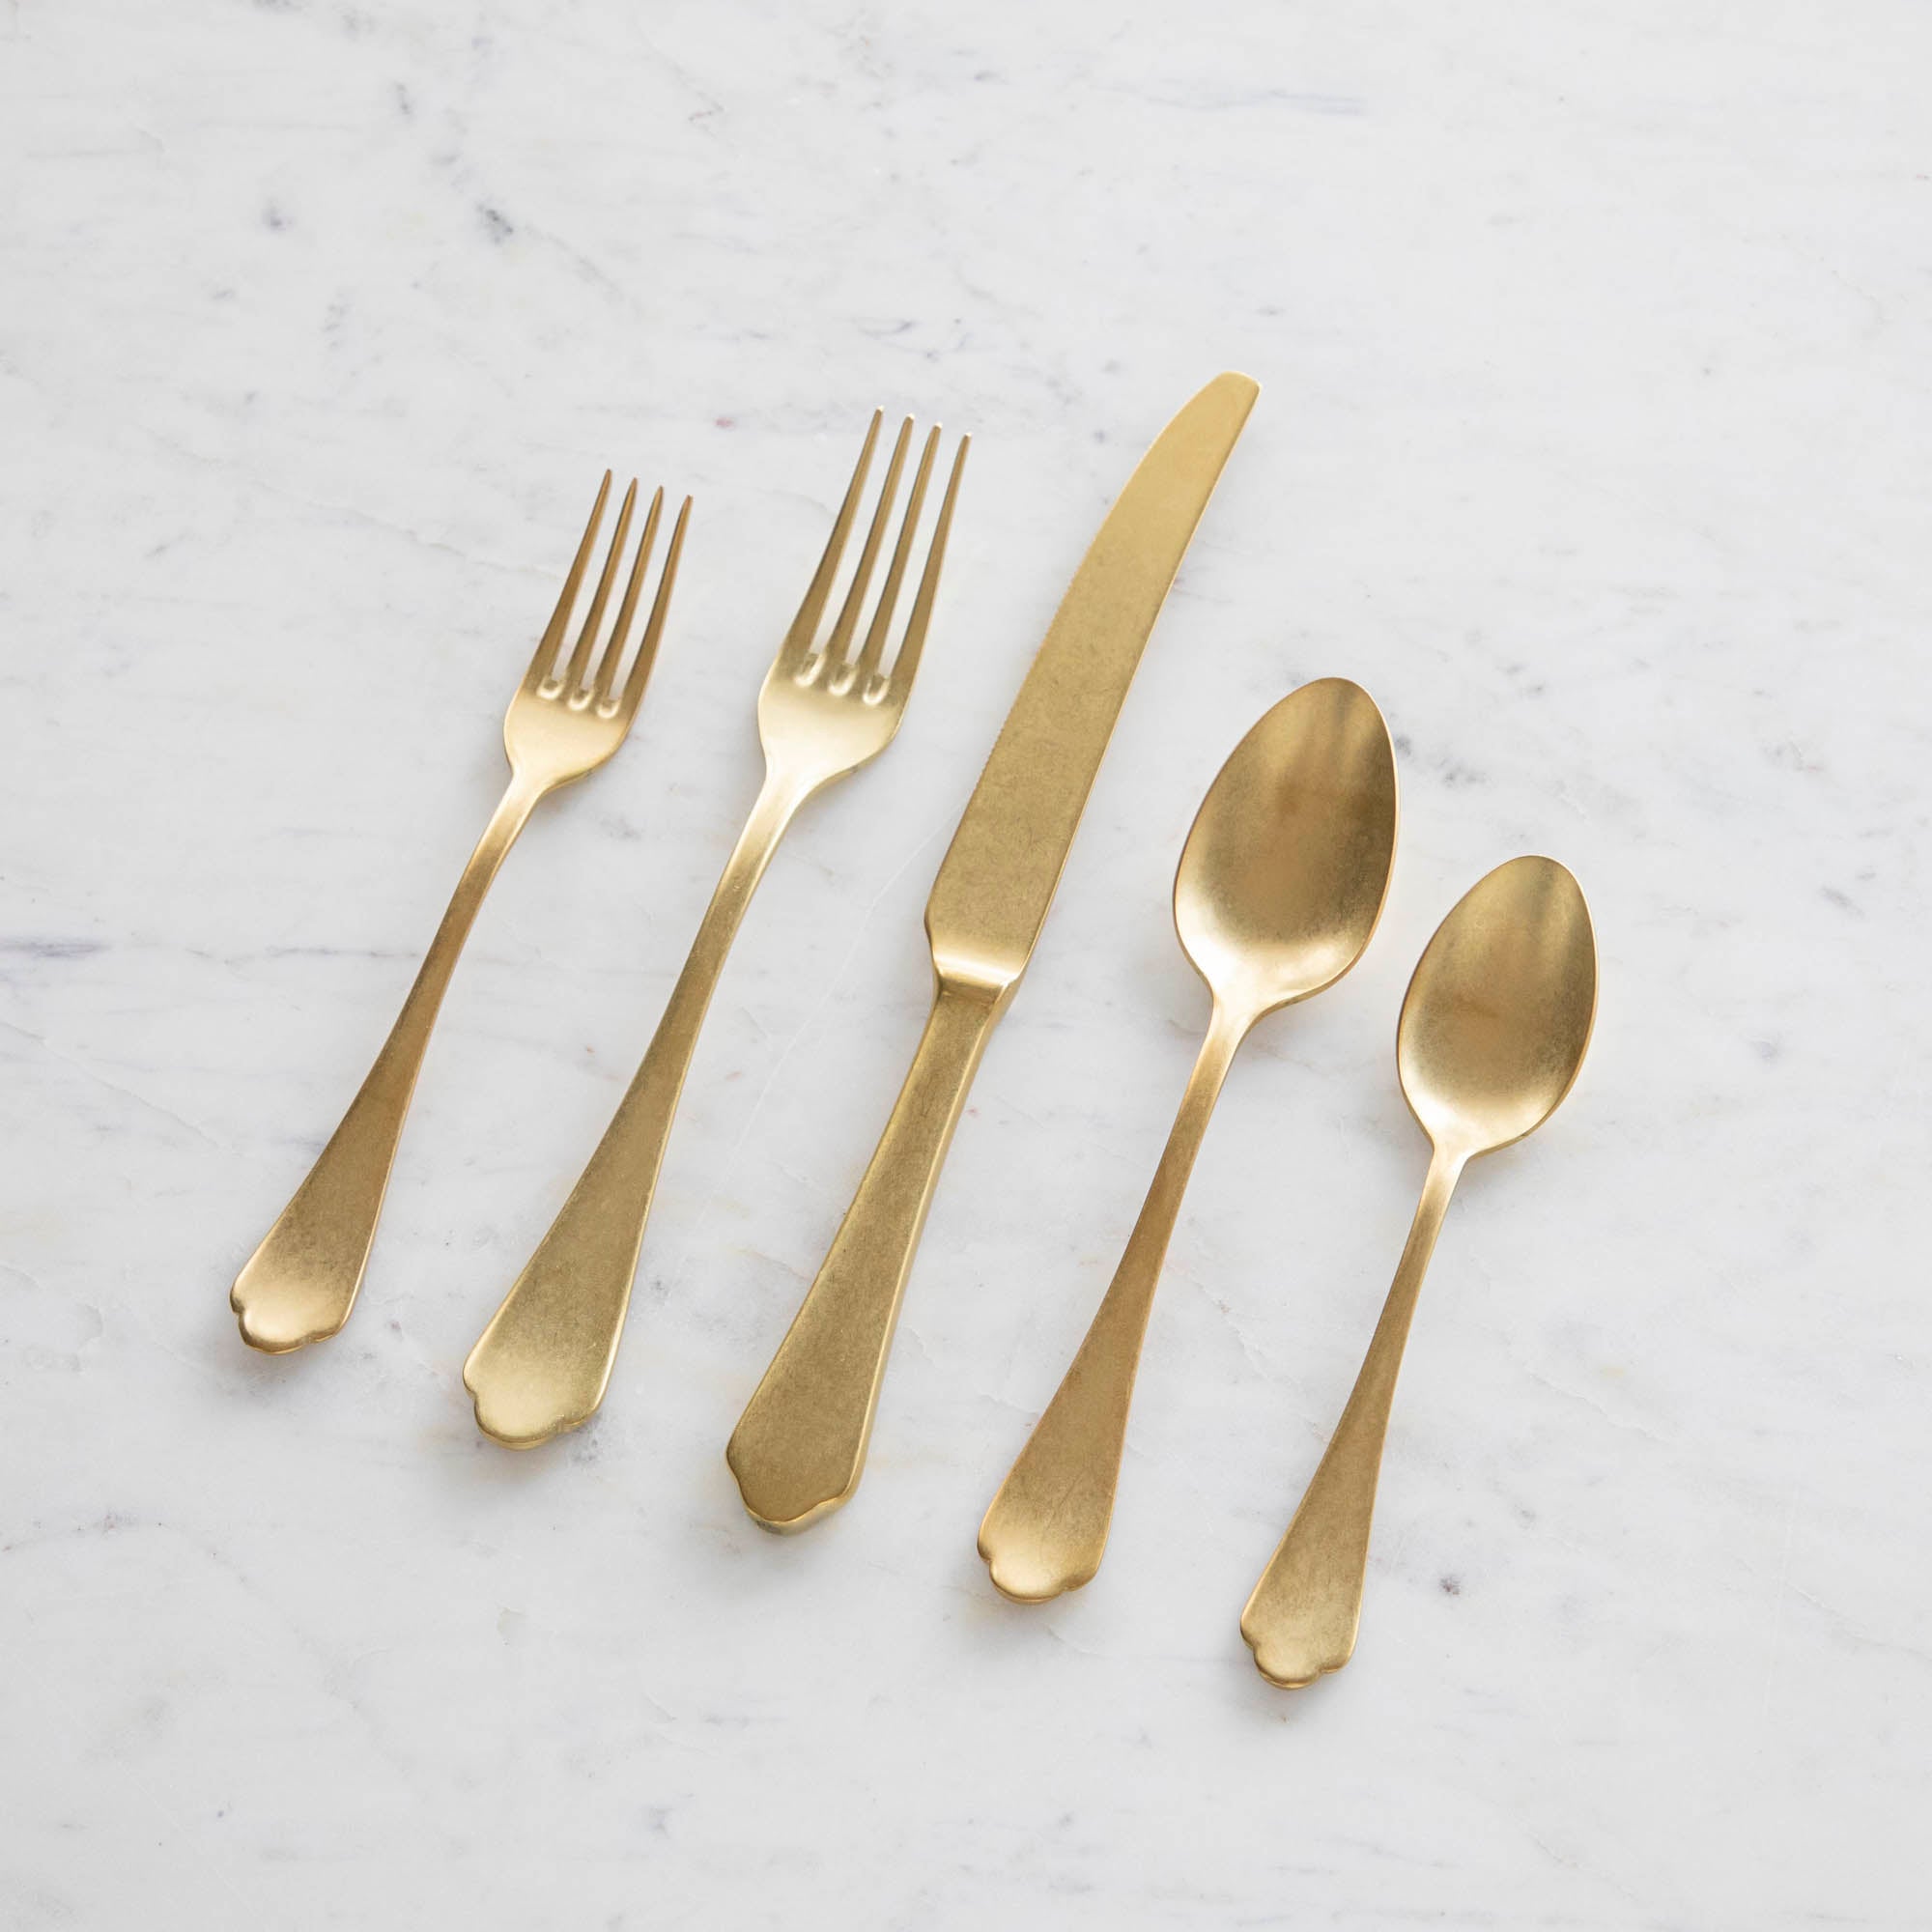 Dolce Vita Pewter Oro 5-Piece Place Setting